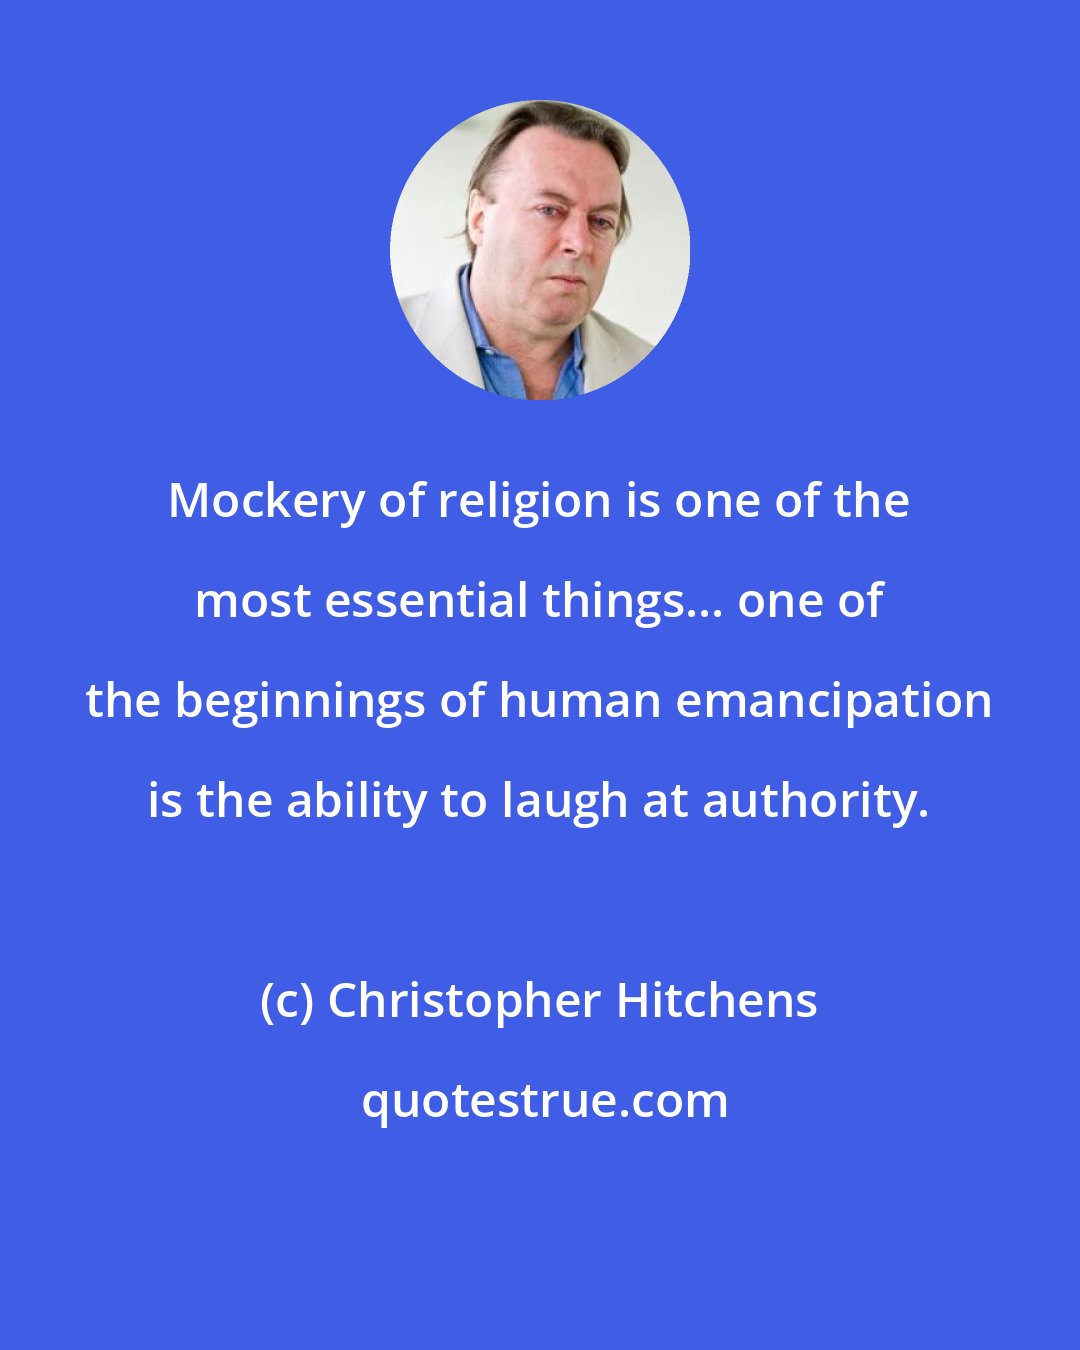 Christopher Hitchens: Mockery of religion is one of the most essential things... one of the beginnings of human emancipation is the ability to laugh at authority.